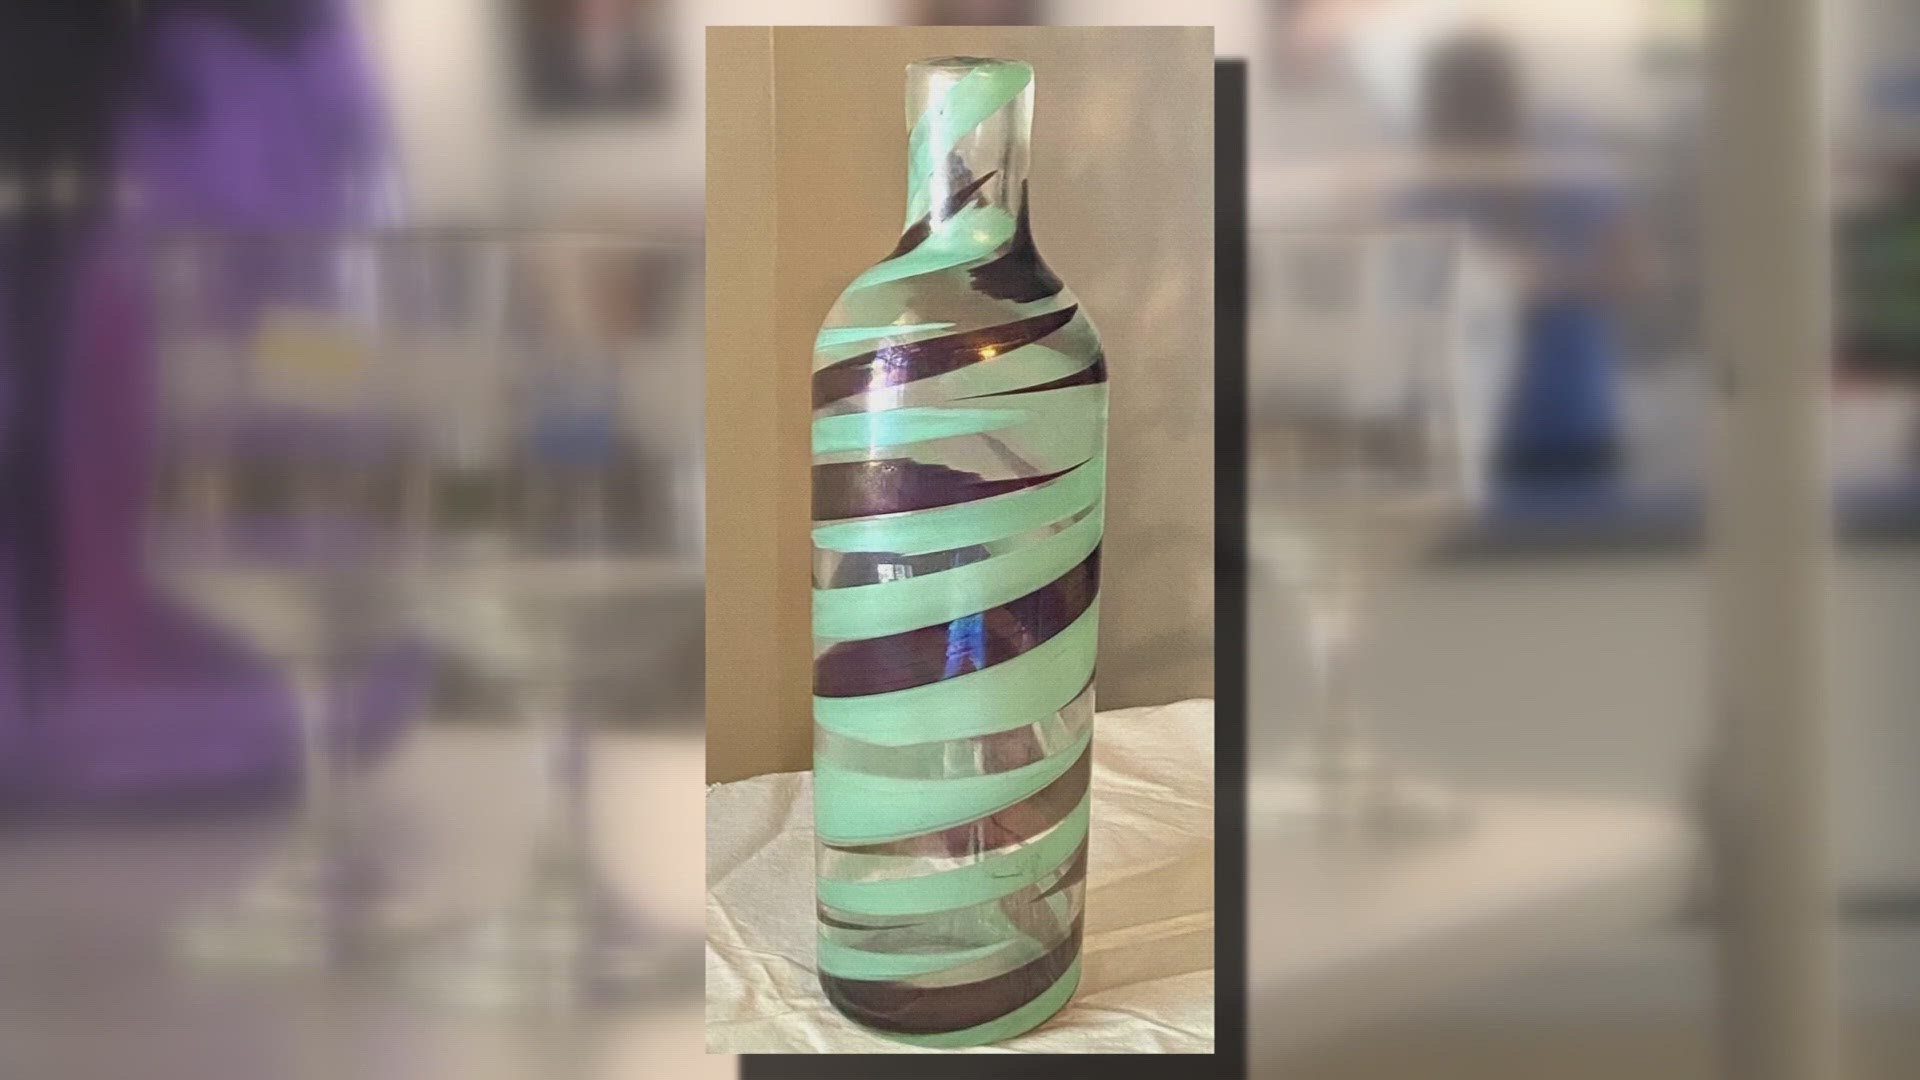 When Jessica bought a vase for $3.99 at a Goodwill in Virginia, she didn't buy it thinking she'd sell it. Her thinking changed after some research.